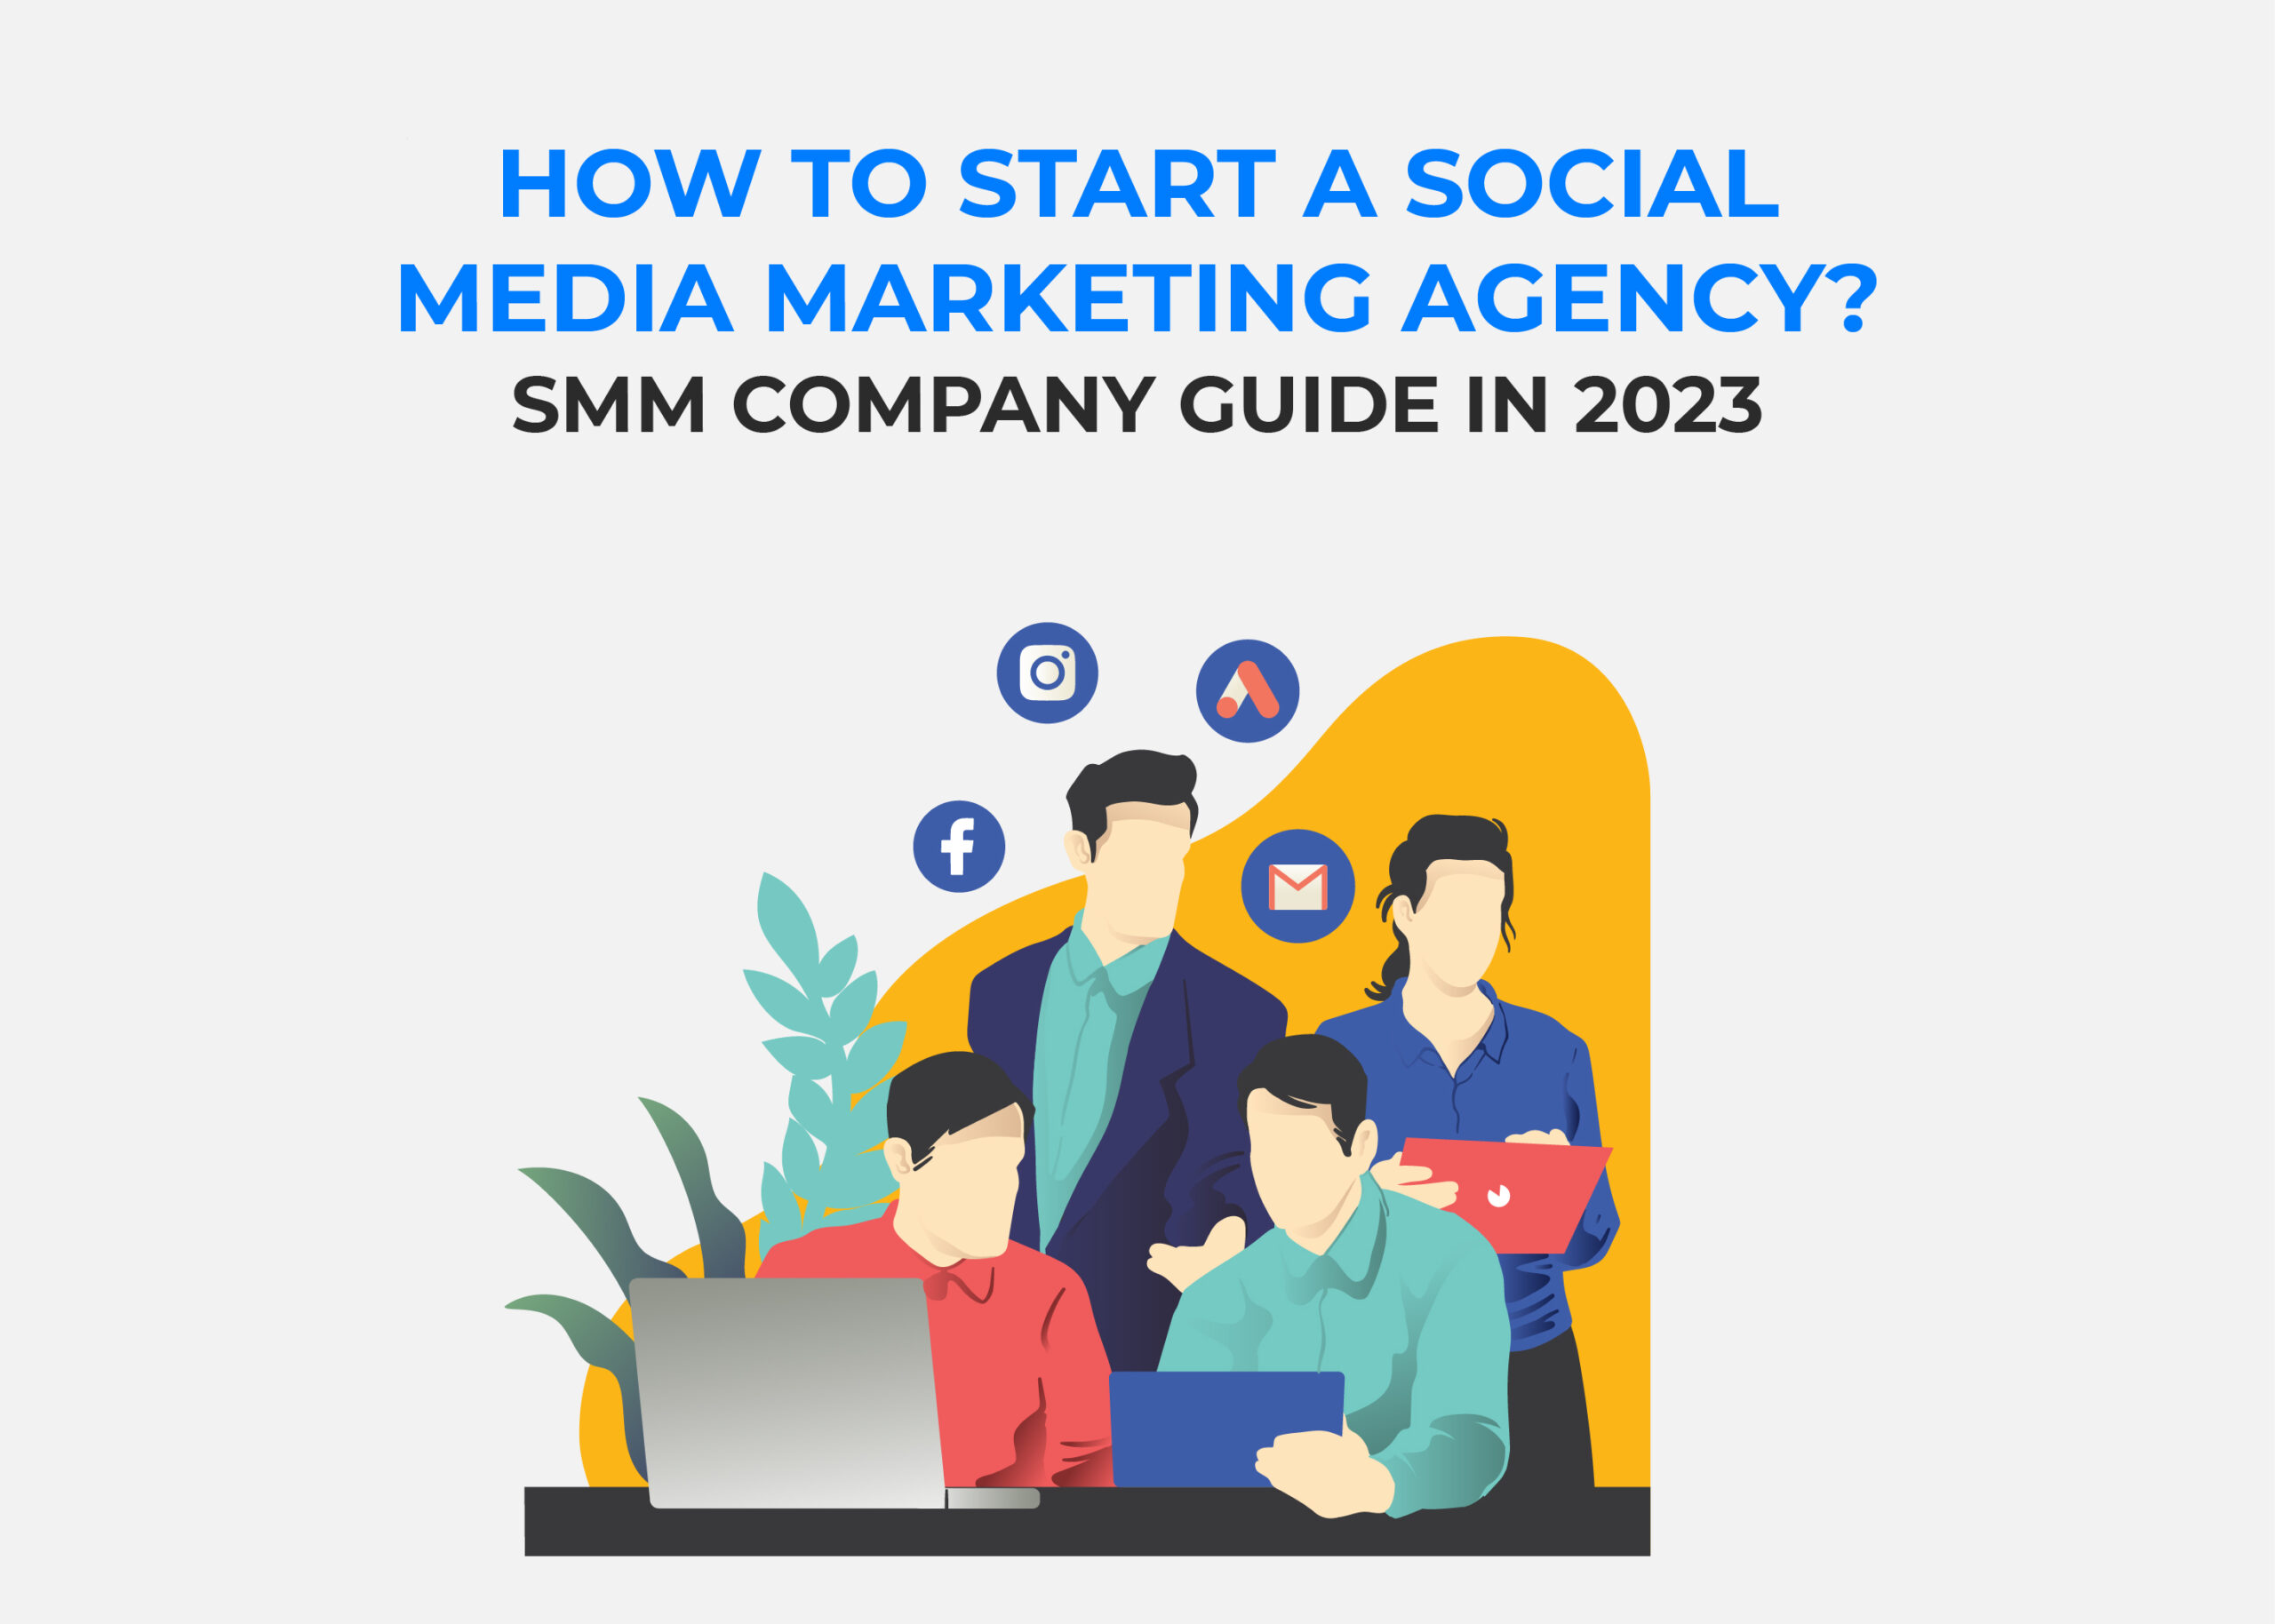 Four marketing experts making strategies on how to start a social media marketing agency.